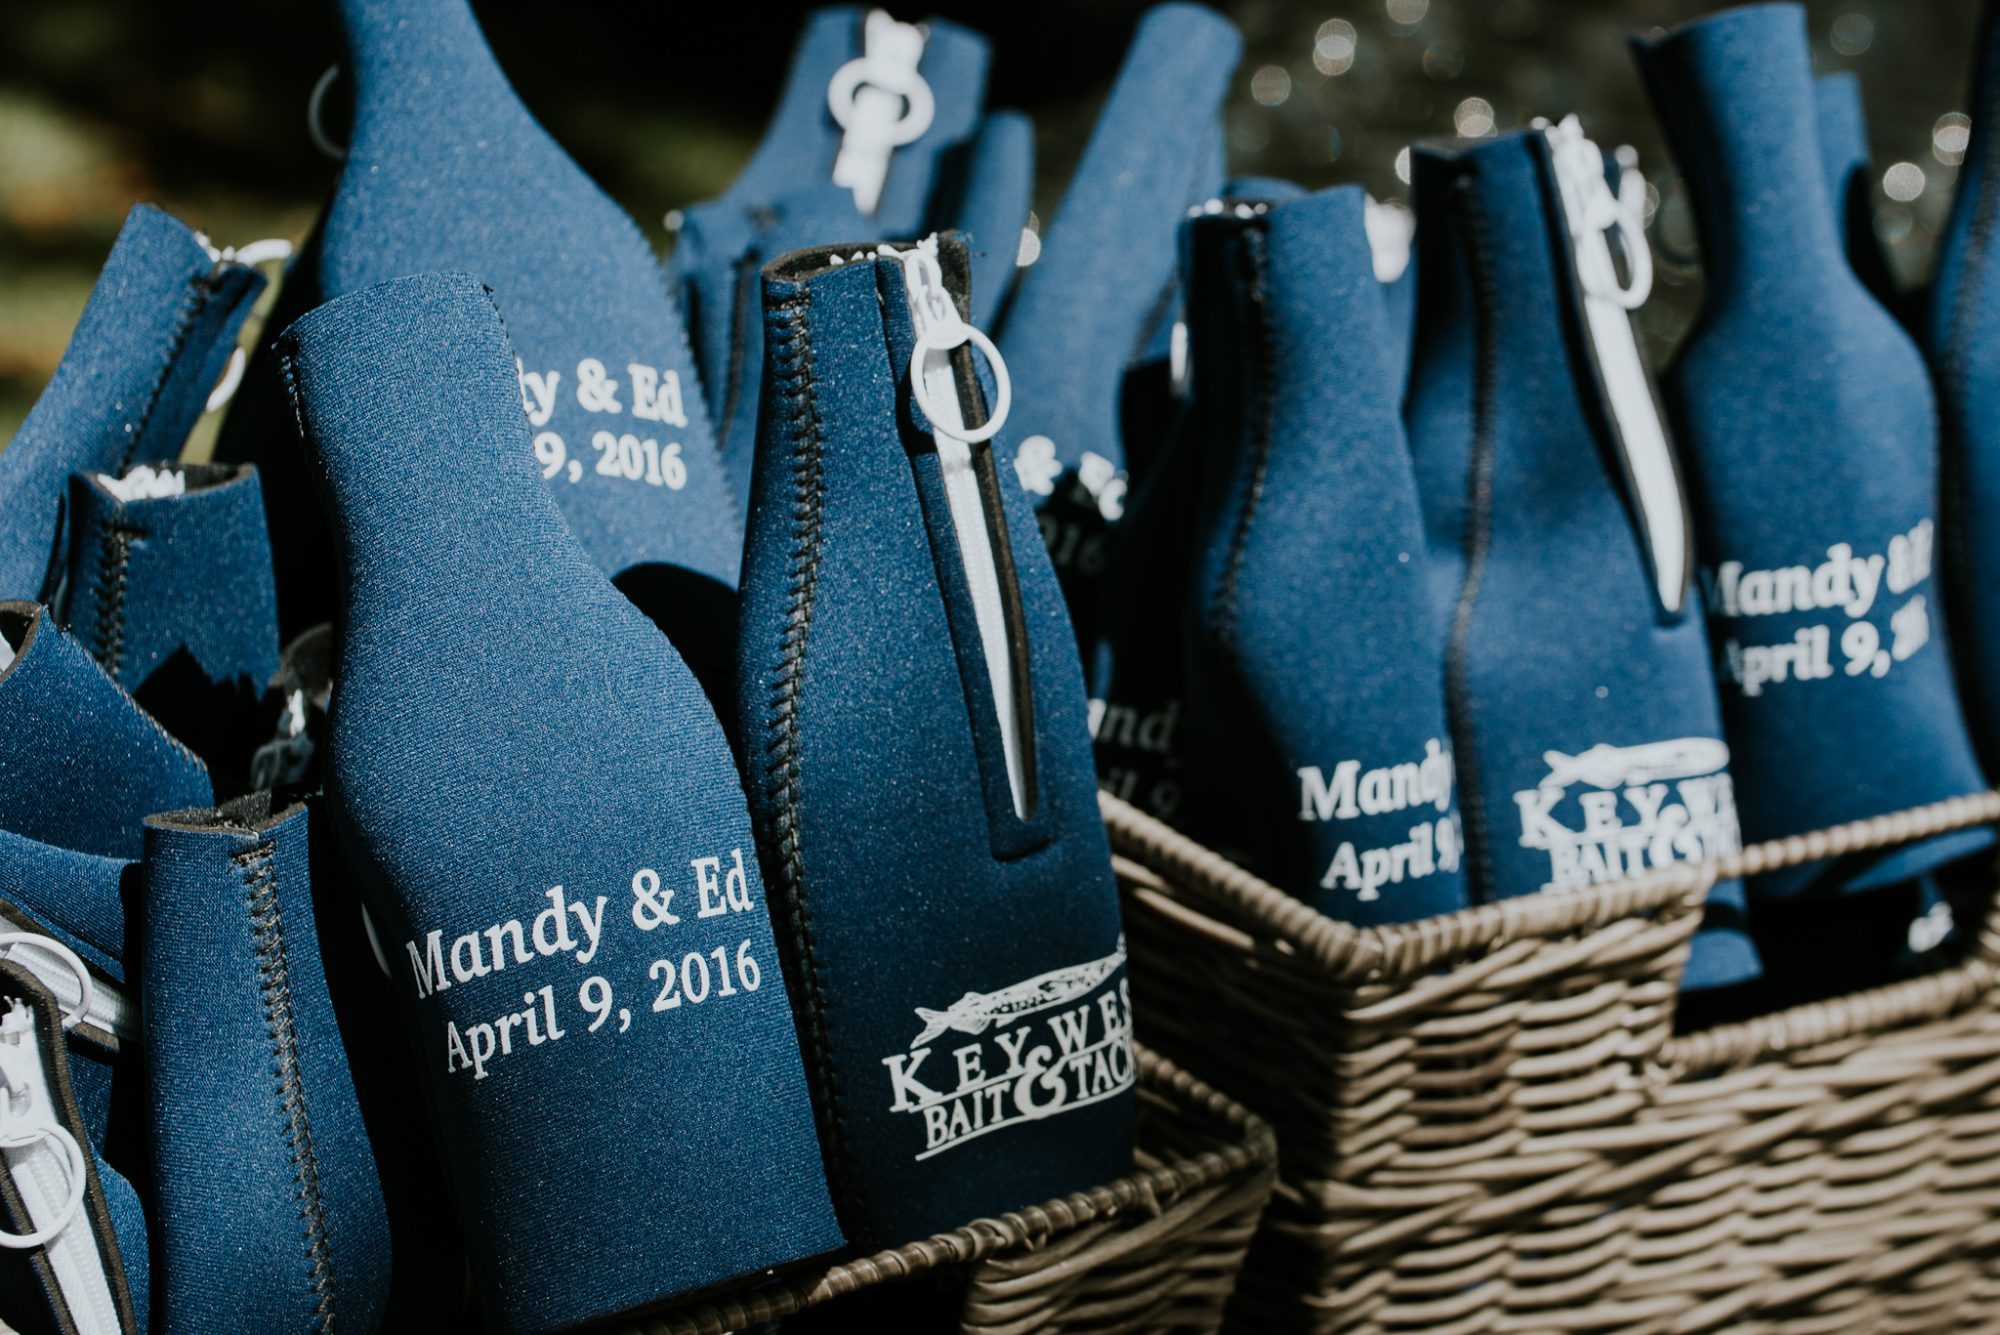 A group of blue wine bottles in a wicker basket, perfect for a Truman White House wedding in Key West.